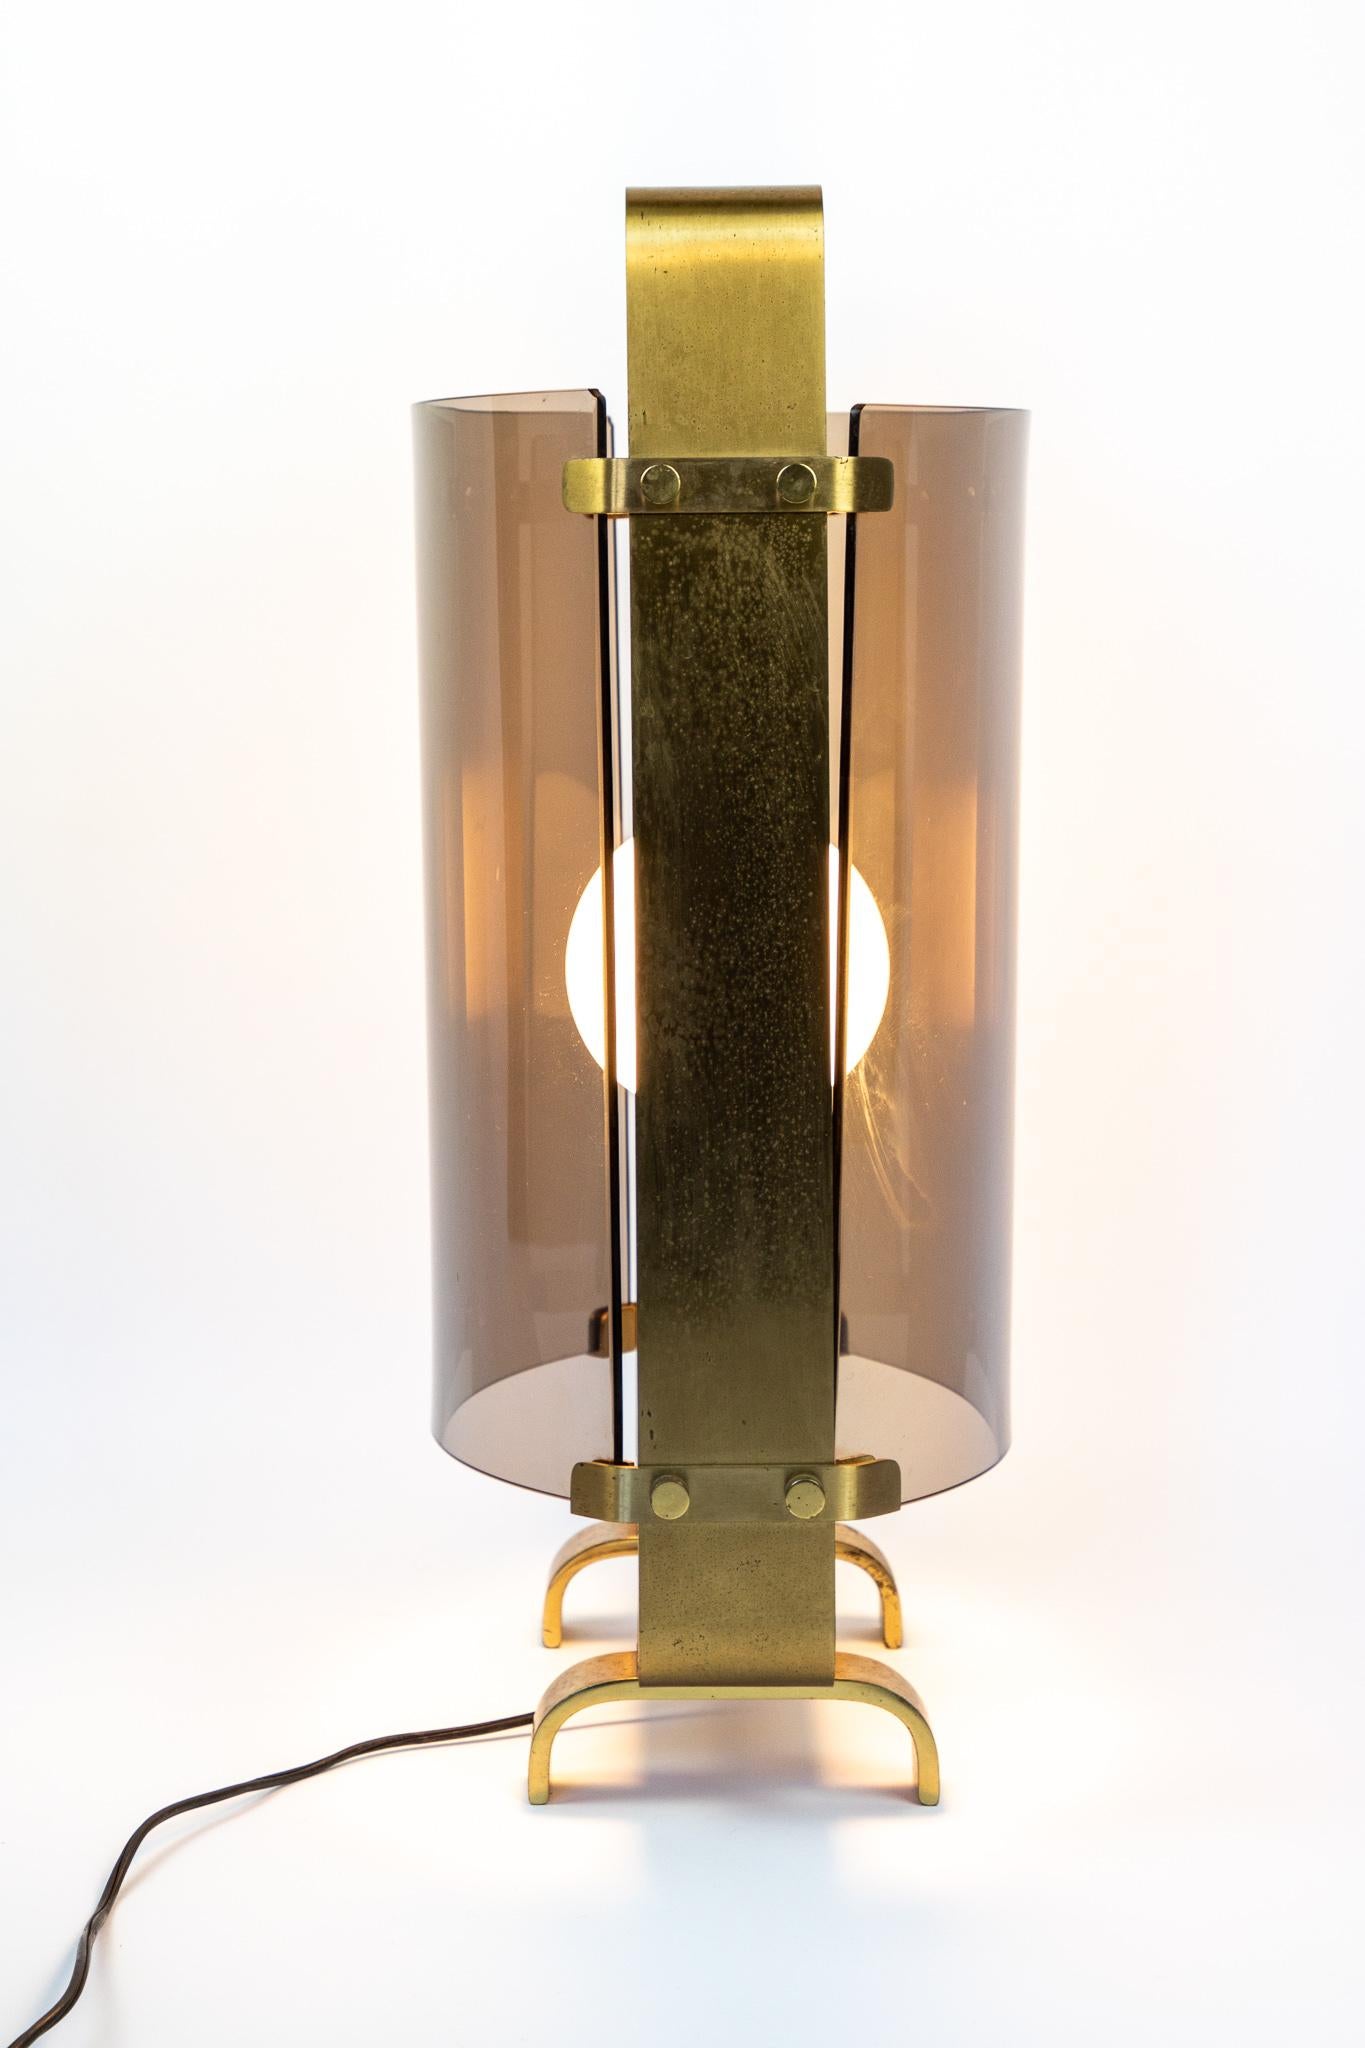 Polished Mid Century Modern Table Lamp XL, Smoked Glass and Golden Brass, Italy, 1960s